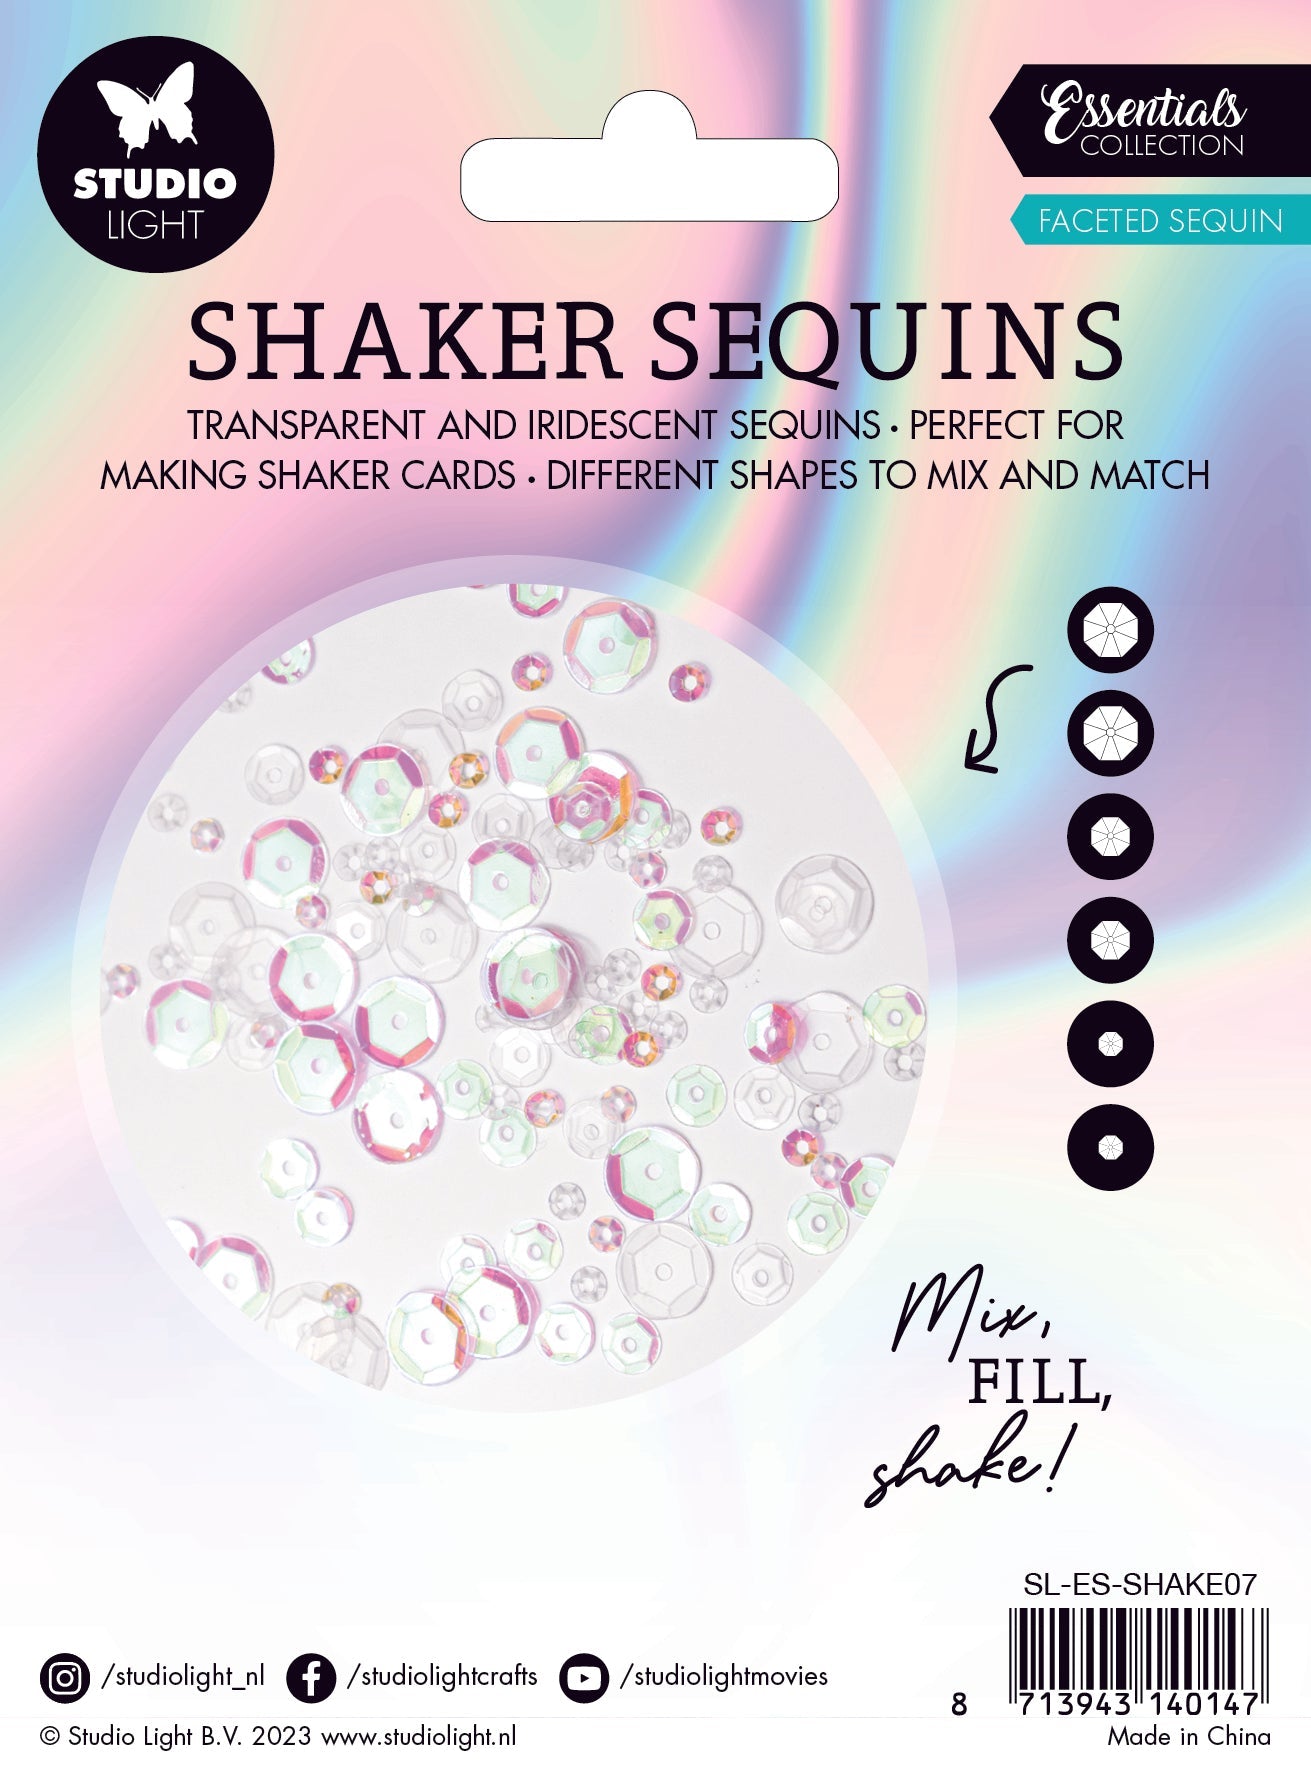 SL Shaker Elements Faceted Sequin Essentials 151x111x15mm 6 PC nr.07